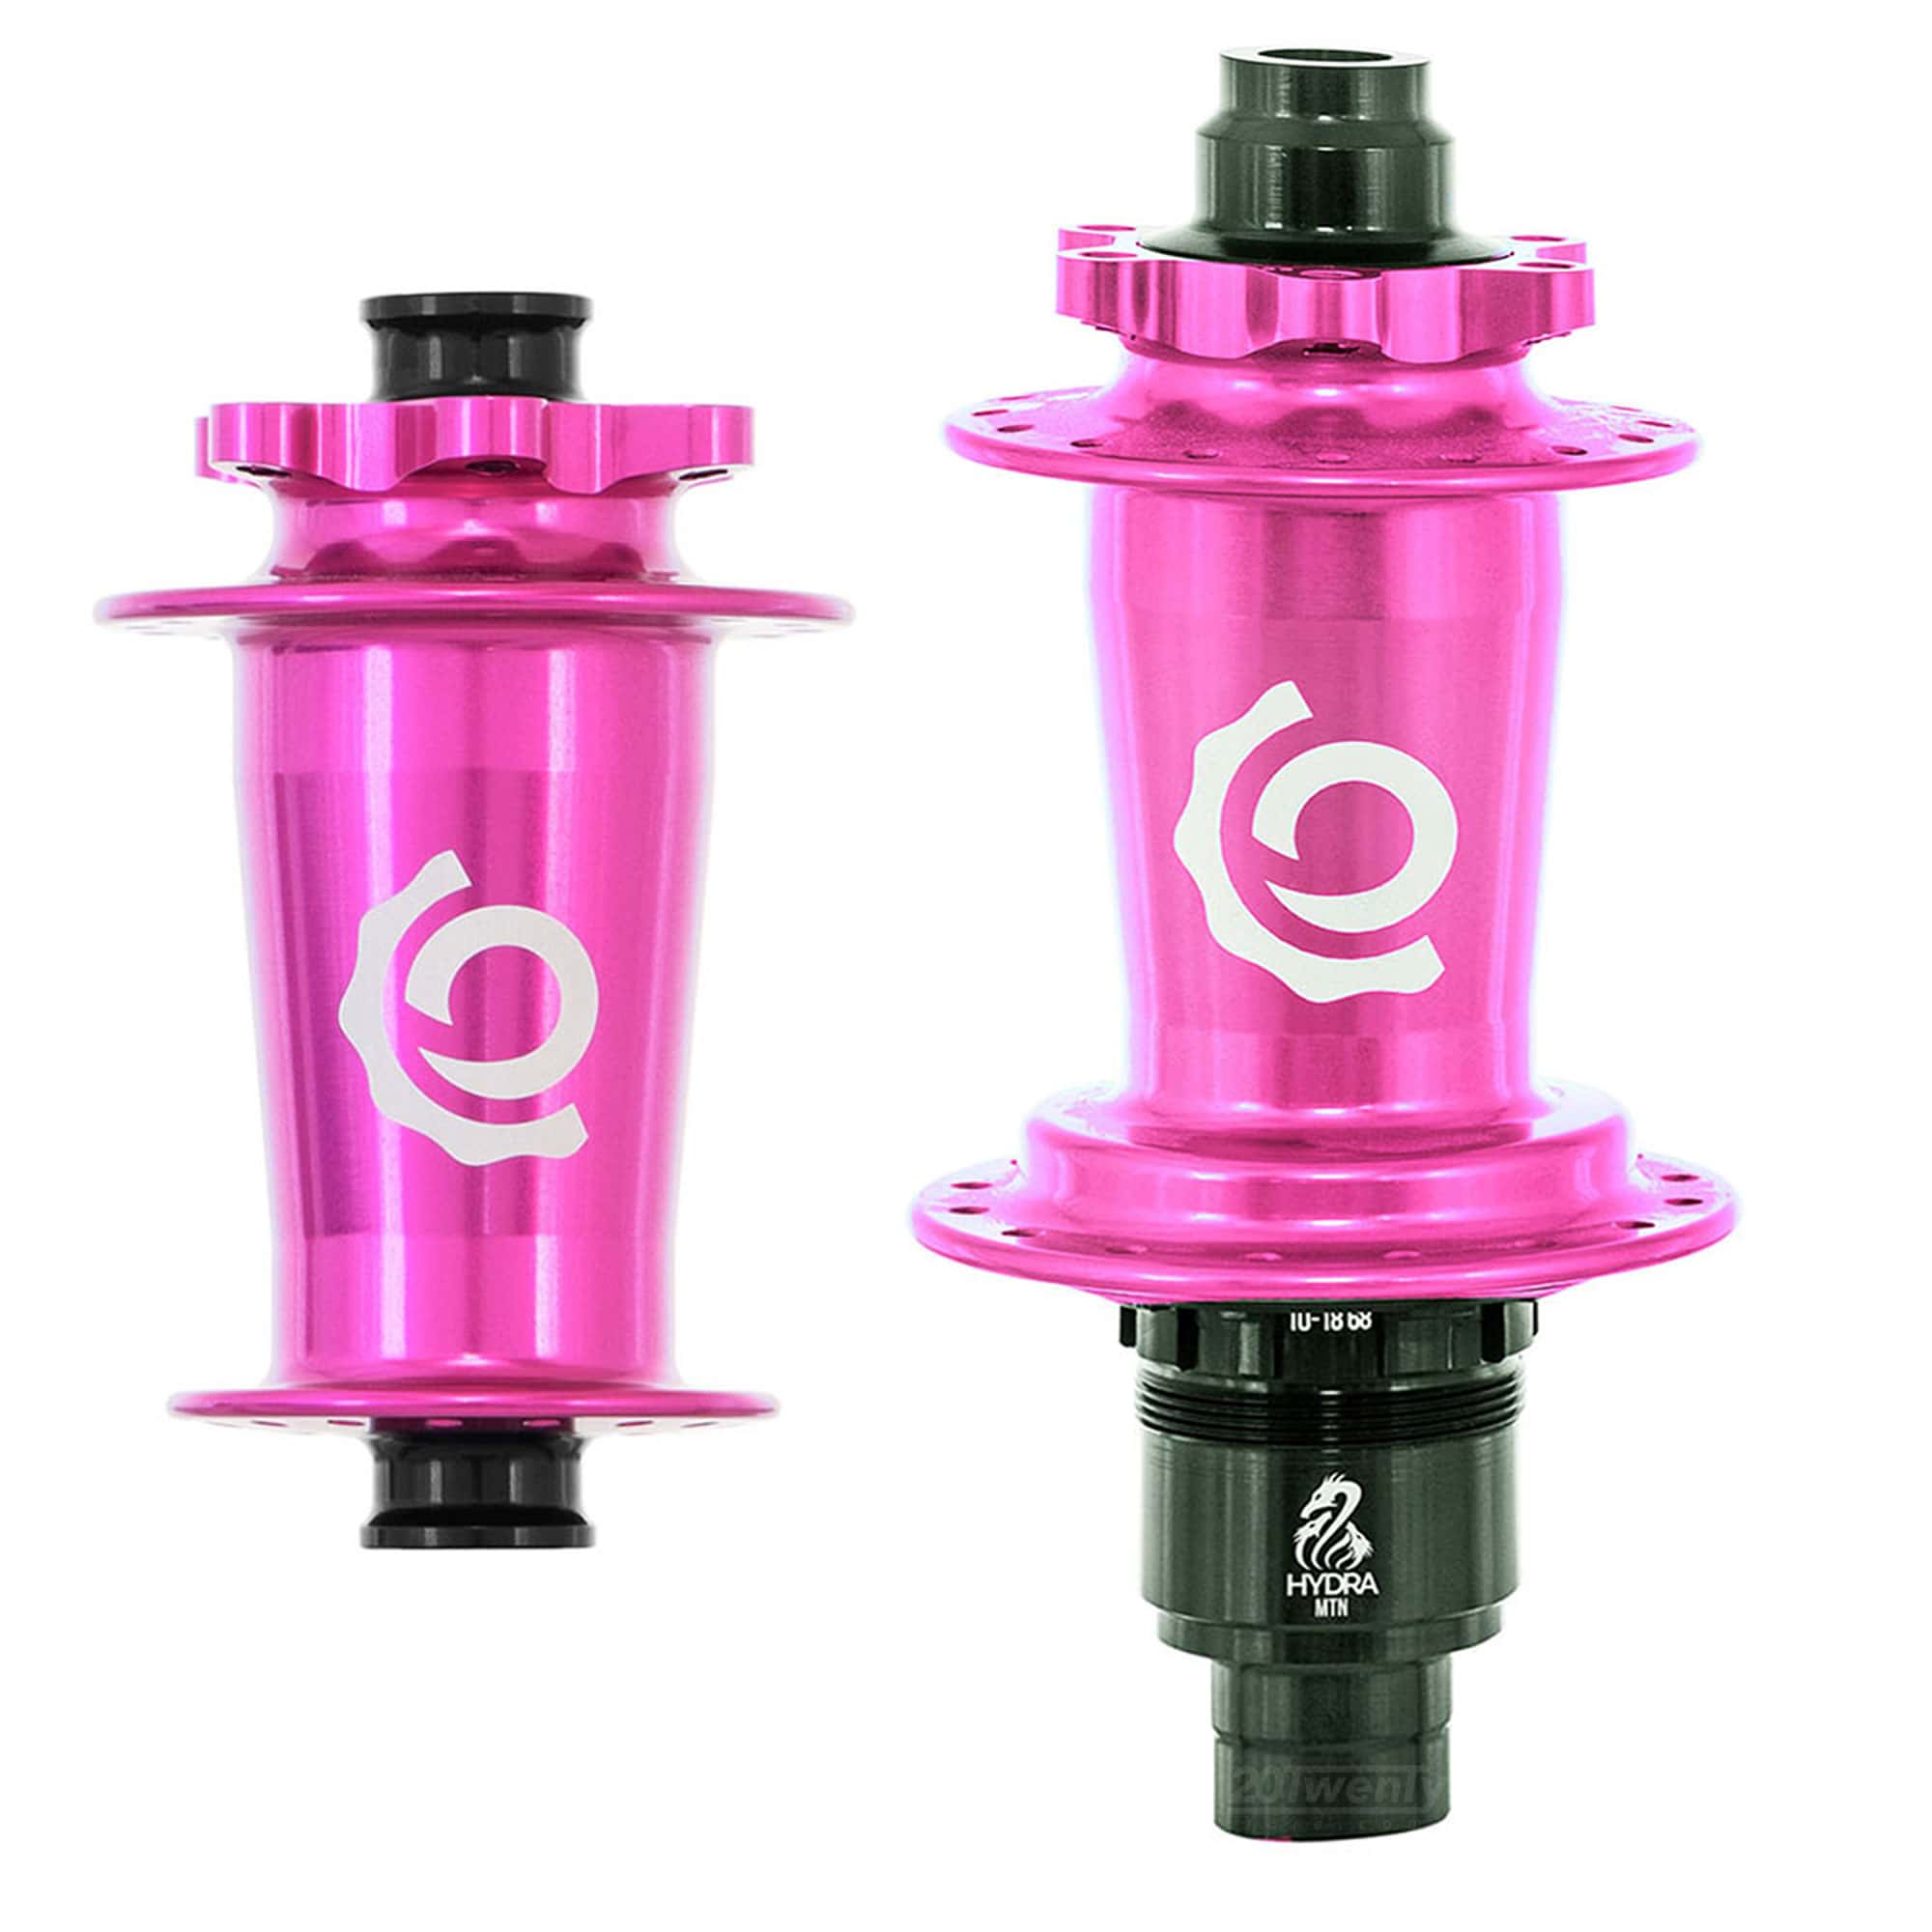 Industry 9 Hydra Classic Boost/SuperBoost 6 Bolt Hubs Pink Pair